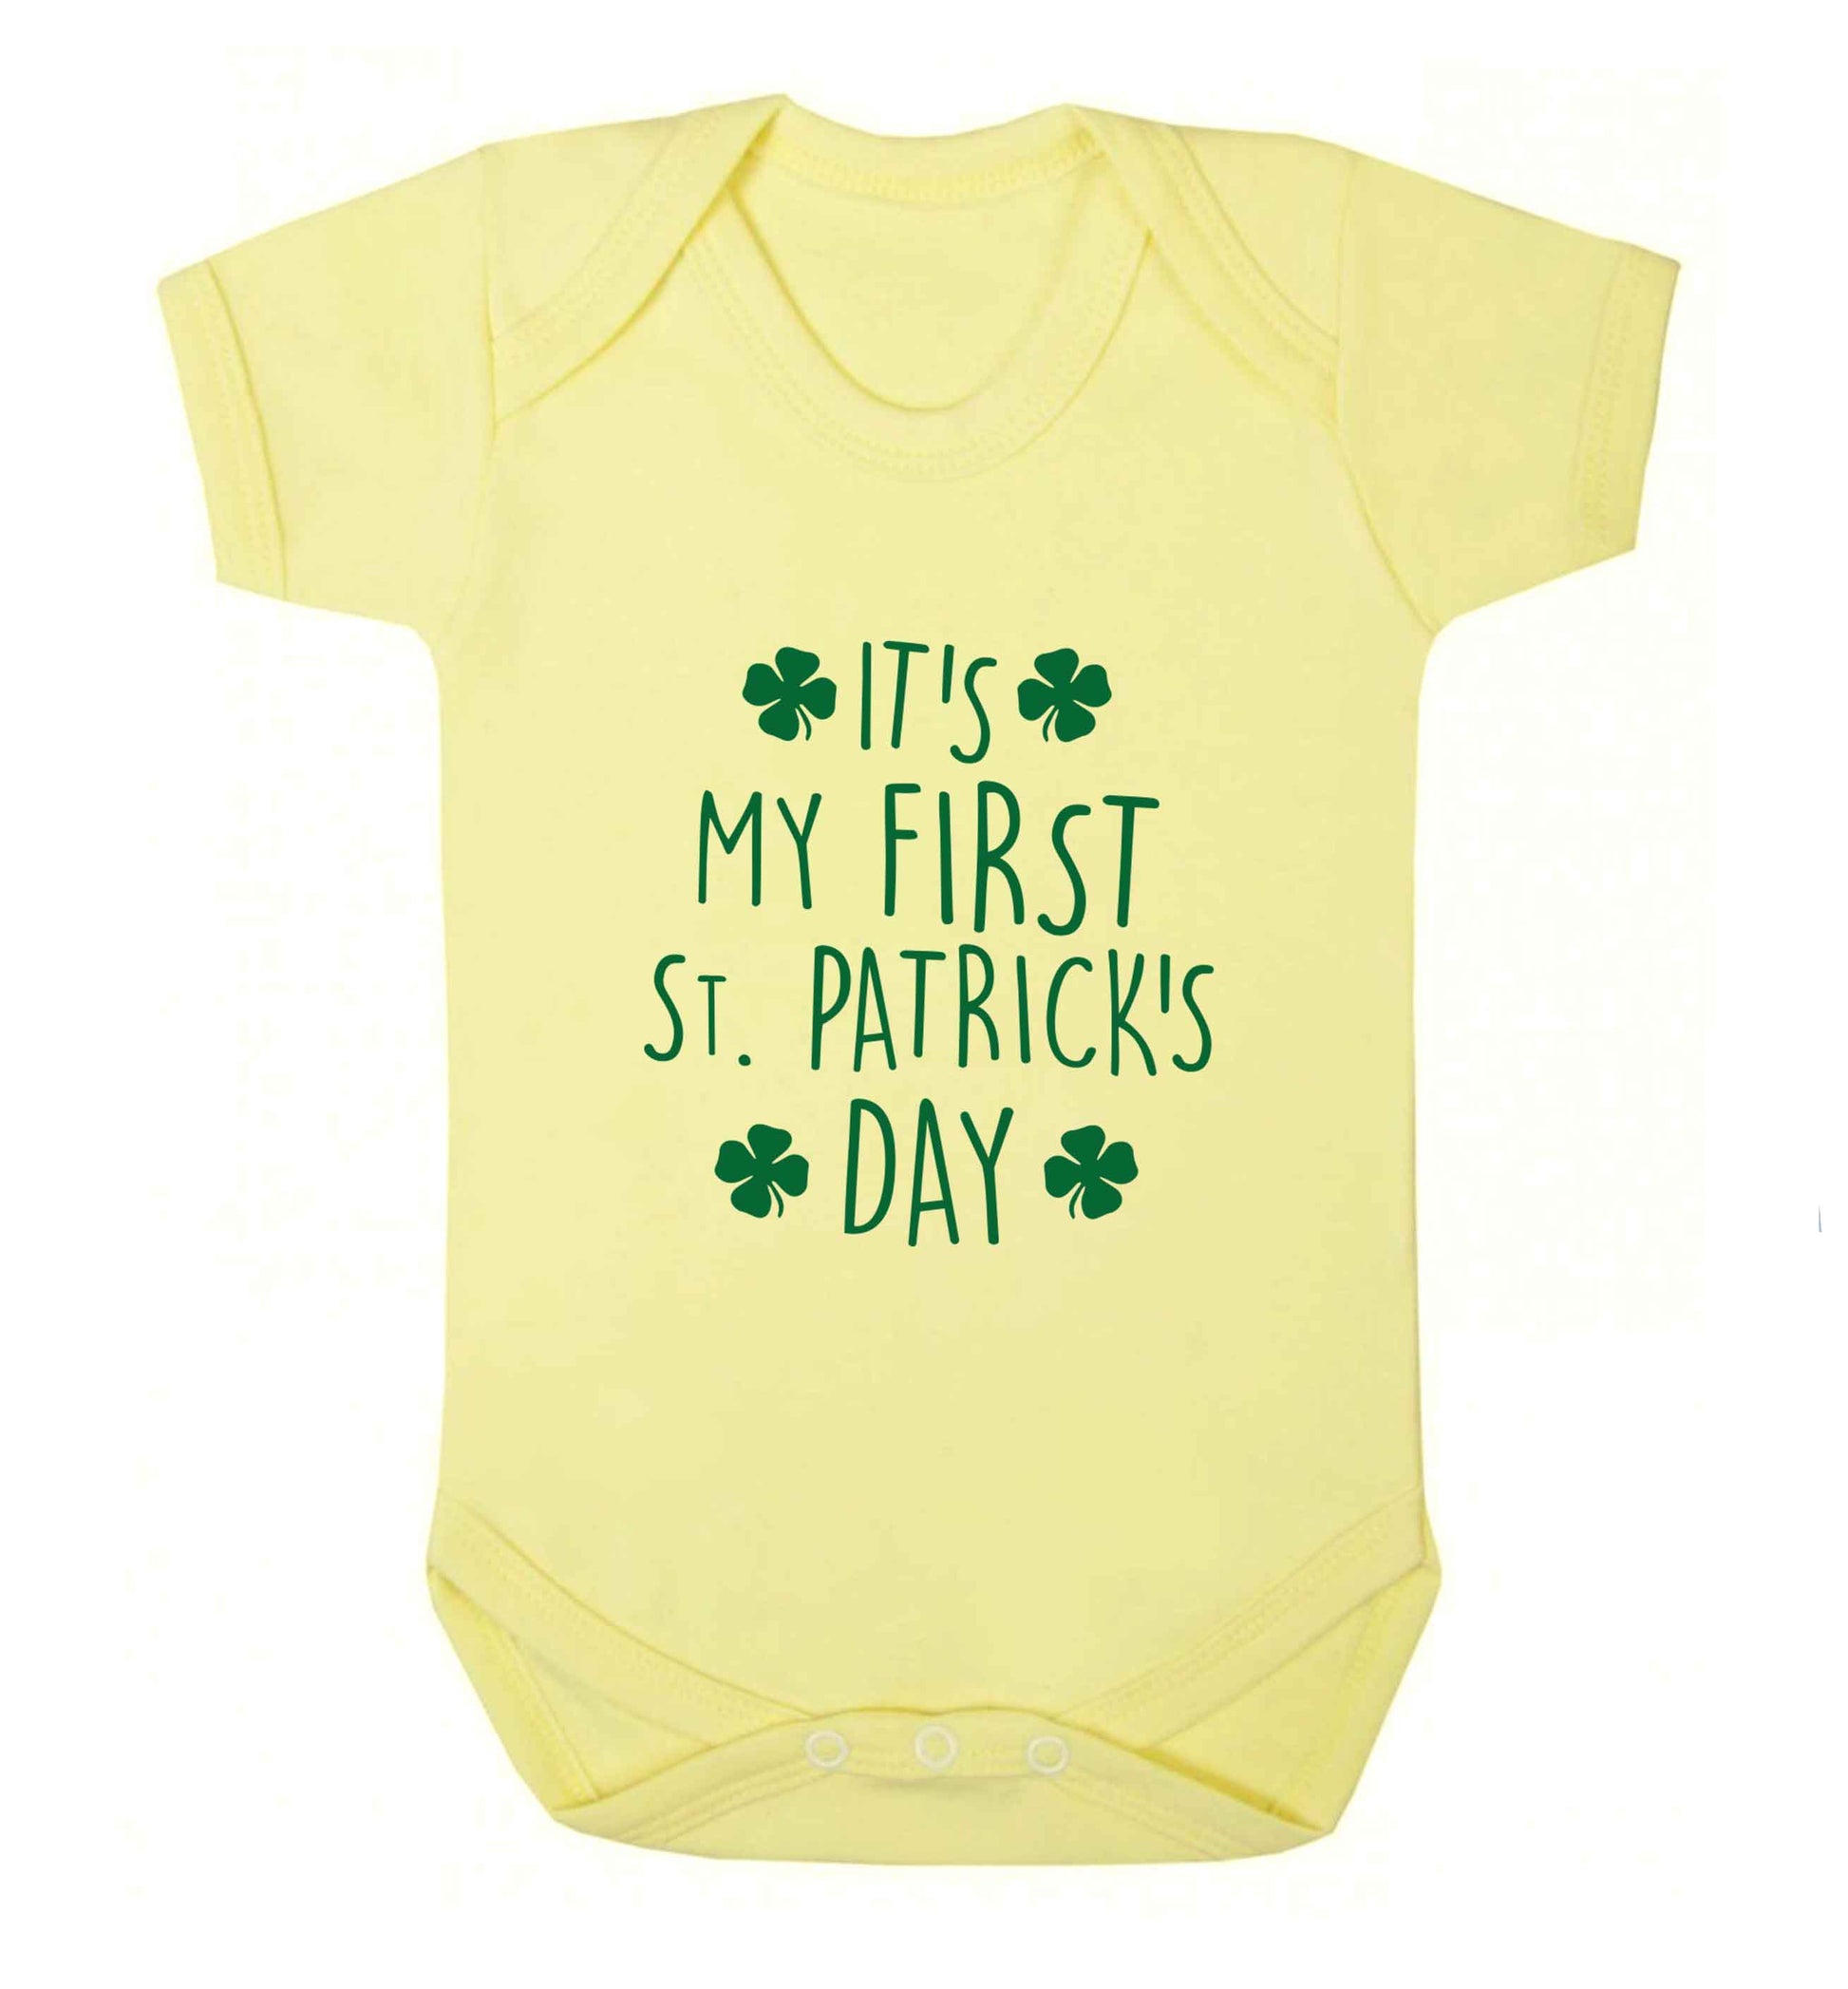 It's my first St.Patrick's day baby vest pale yellow 18-24 months